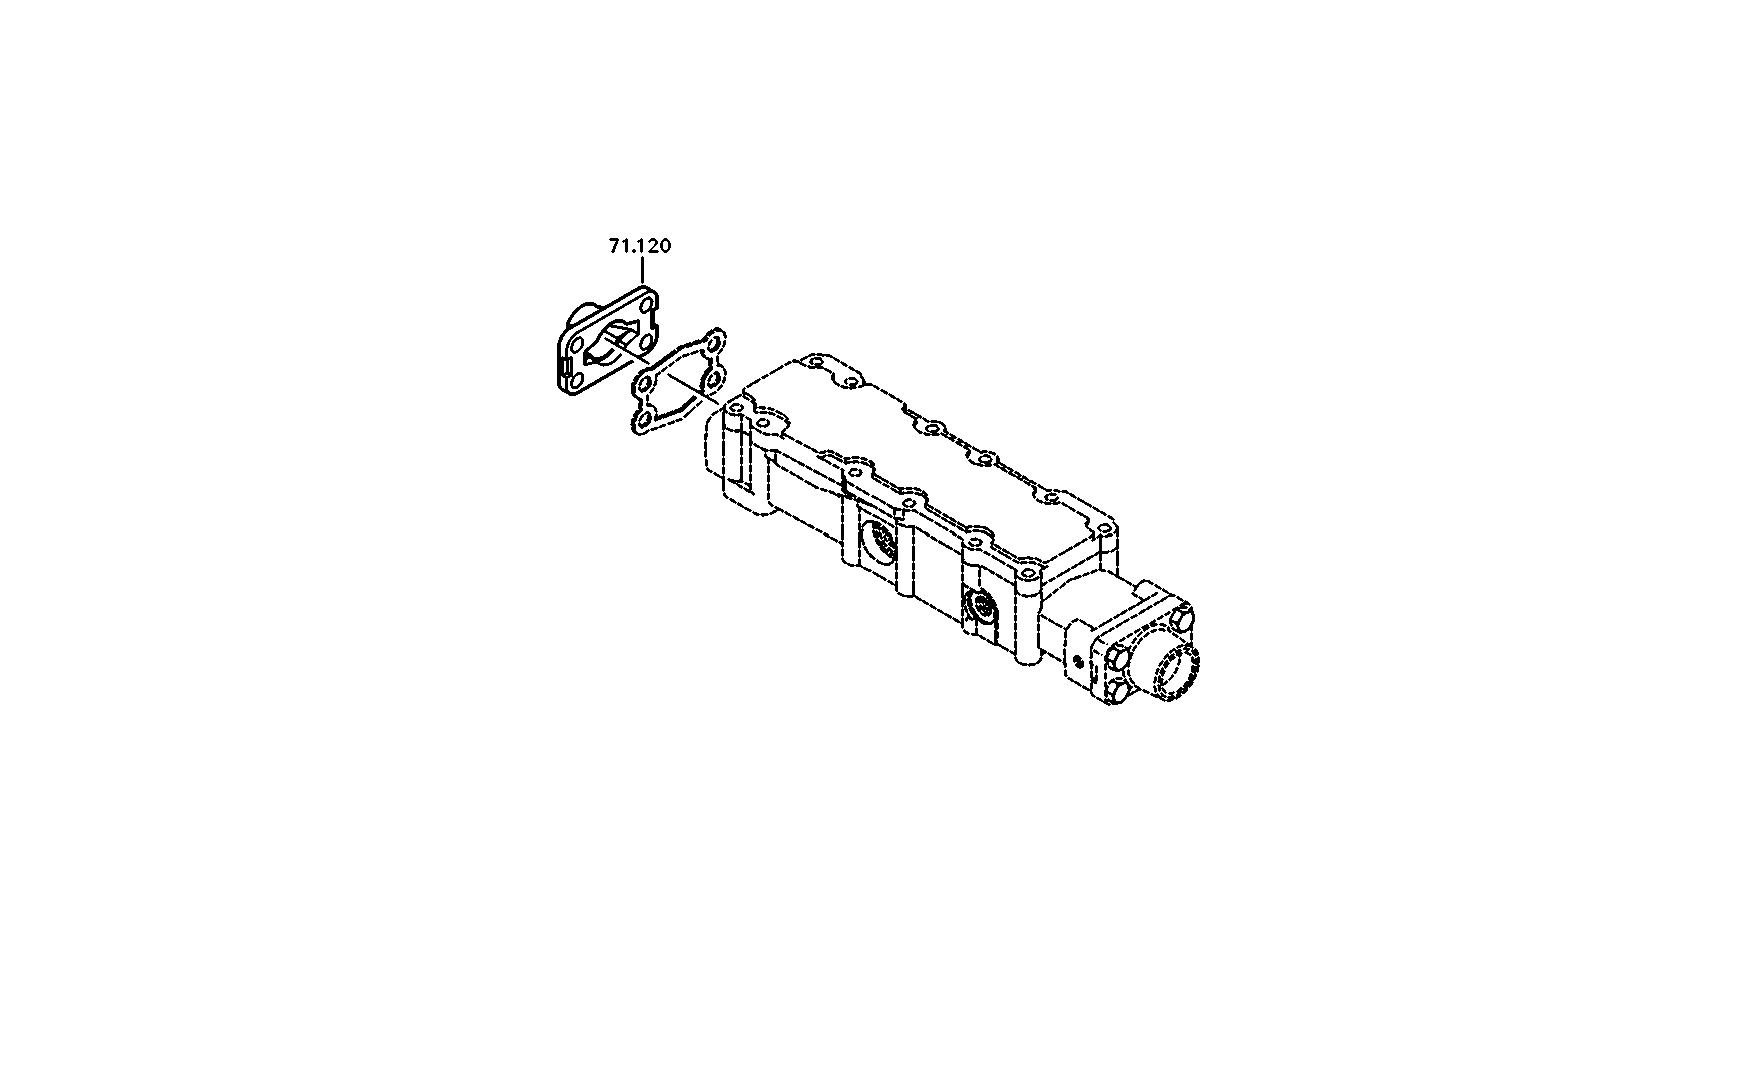 drawing for DAF 1634625 - PLANET CARRIER (figure 4)